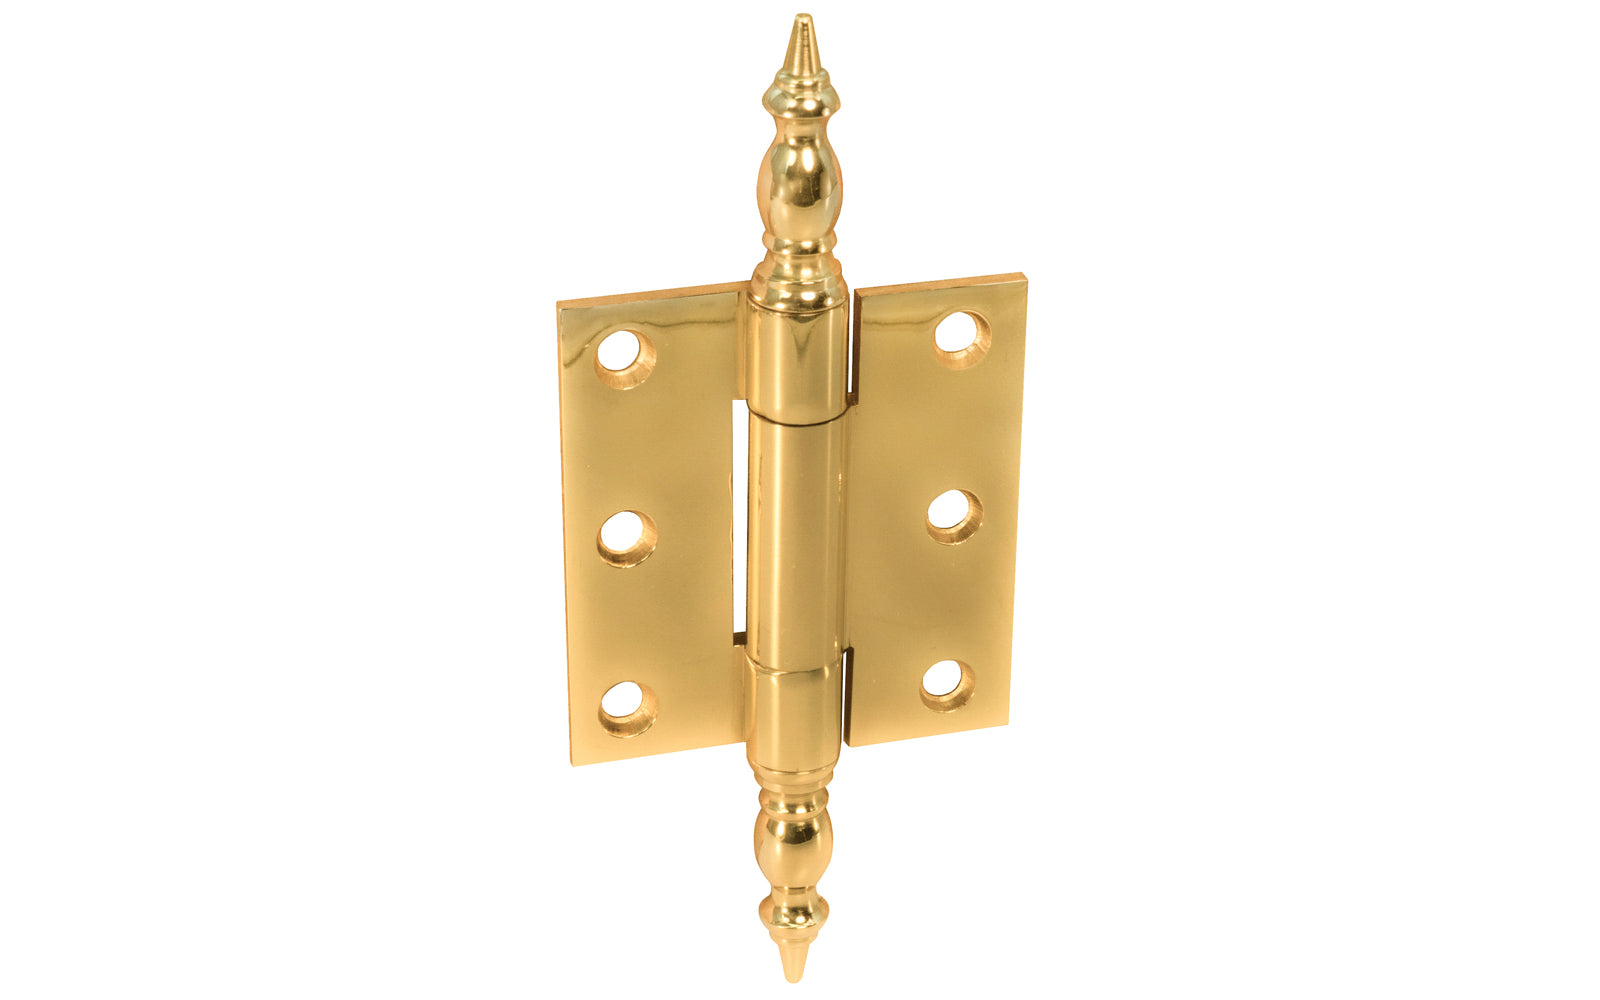 Solid Brass Steeple-Tip Hinge ~ 2-1/8" x 2-1/4". High quality extruded & milled heavy gauge swaged hinge with steeple tips for cabinets, armoires, hutches, wardrobes, clock cases & cabinets with large doors. Made of solid brass material. Lacquered brass.